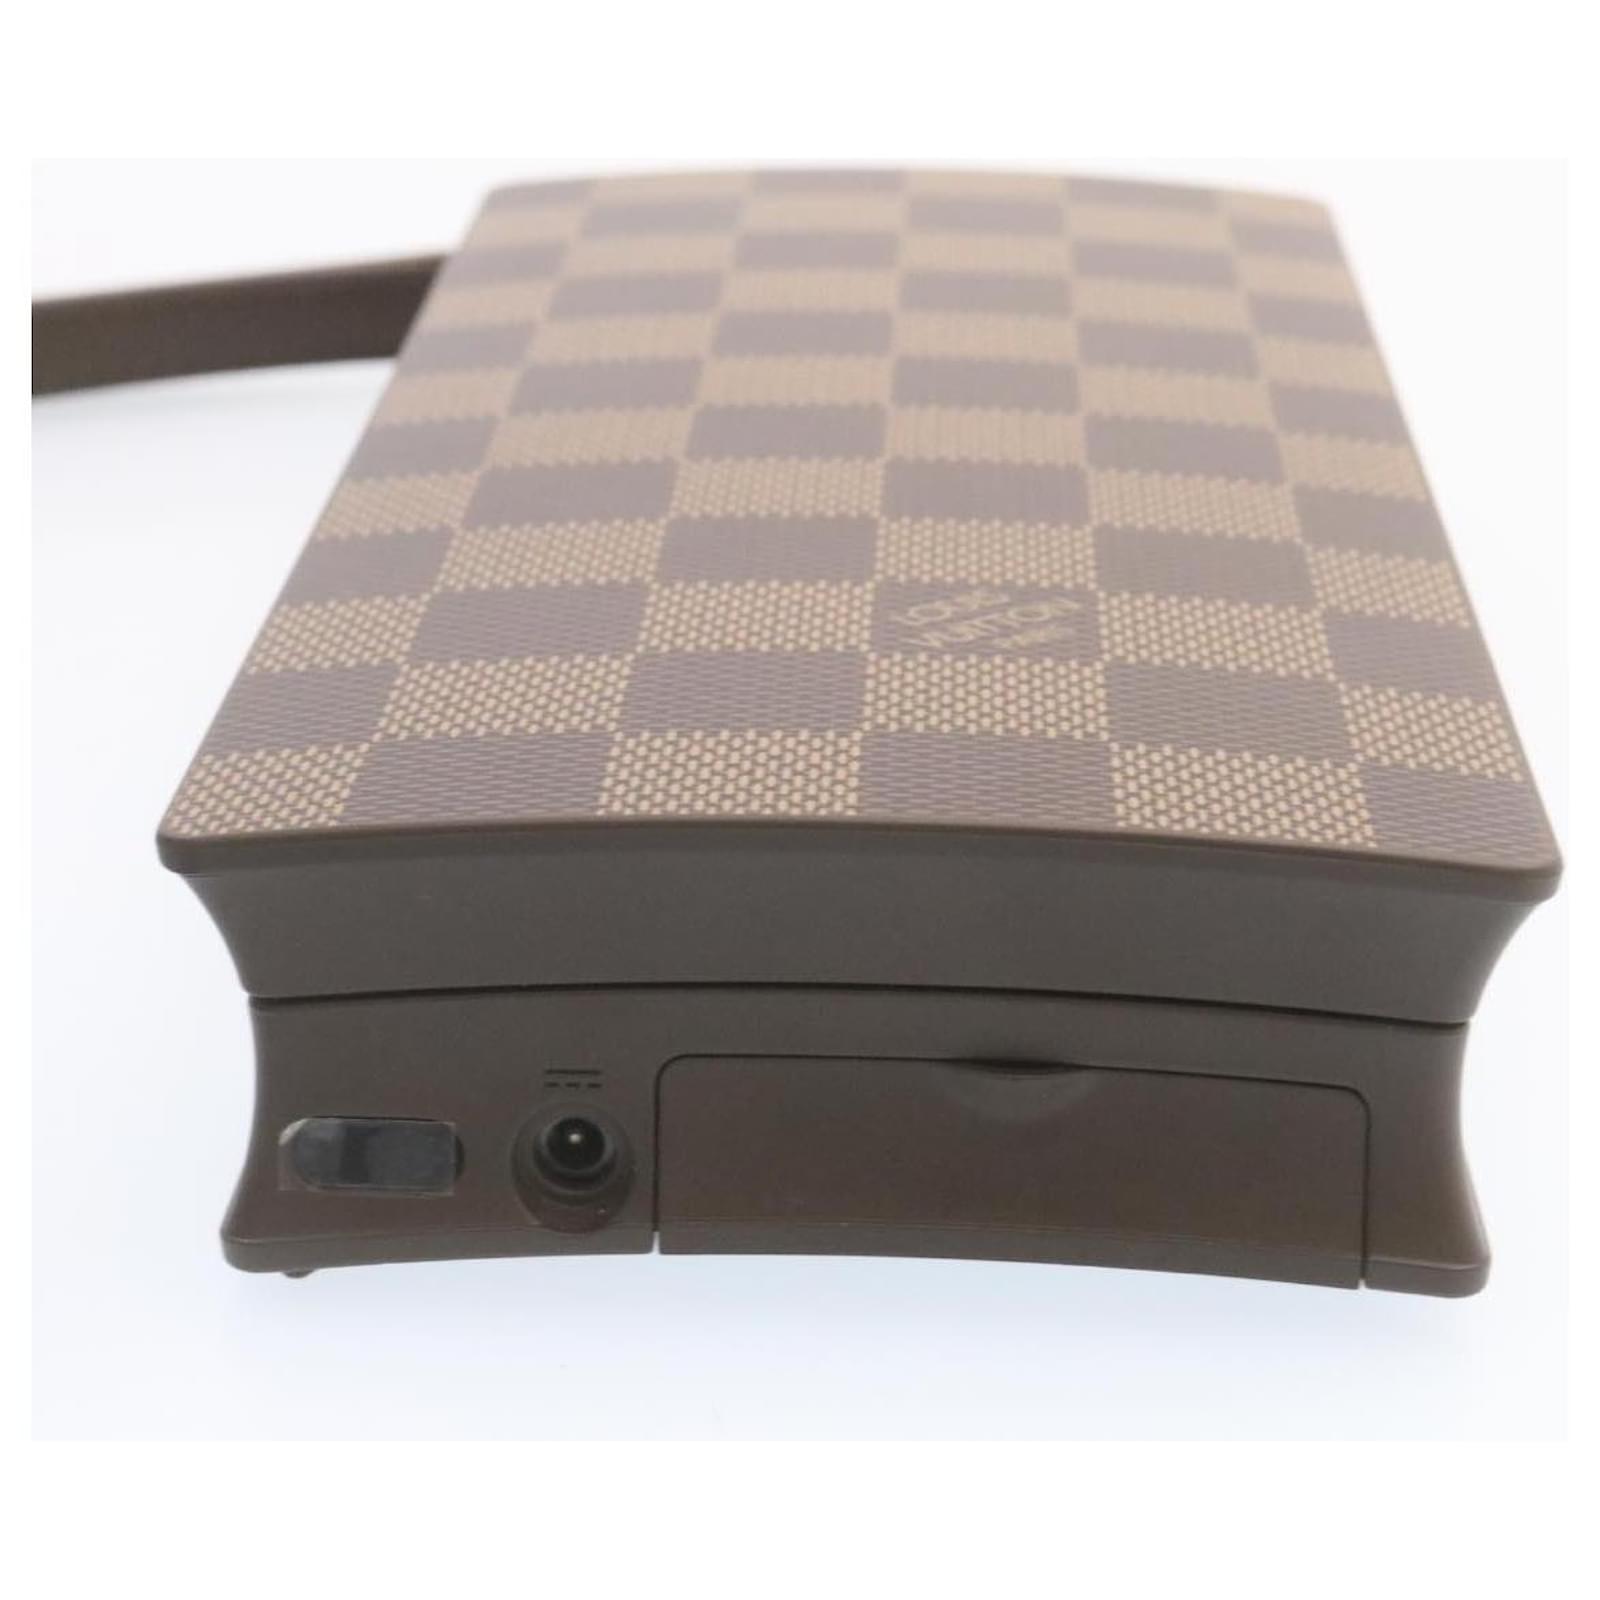 cohost! - I need to draw your attention to the LOUIS VUITTON Clavier by  CELUX MC/HC 300HC handheld PC